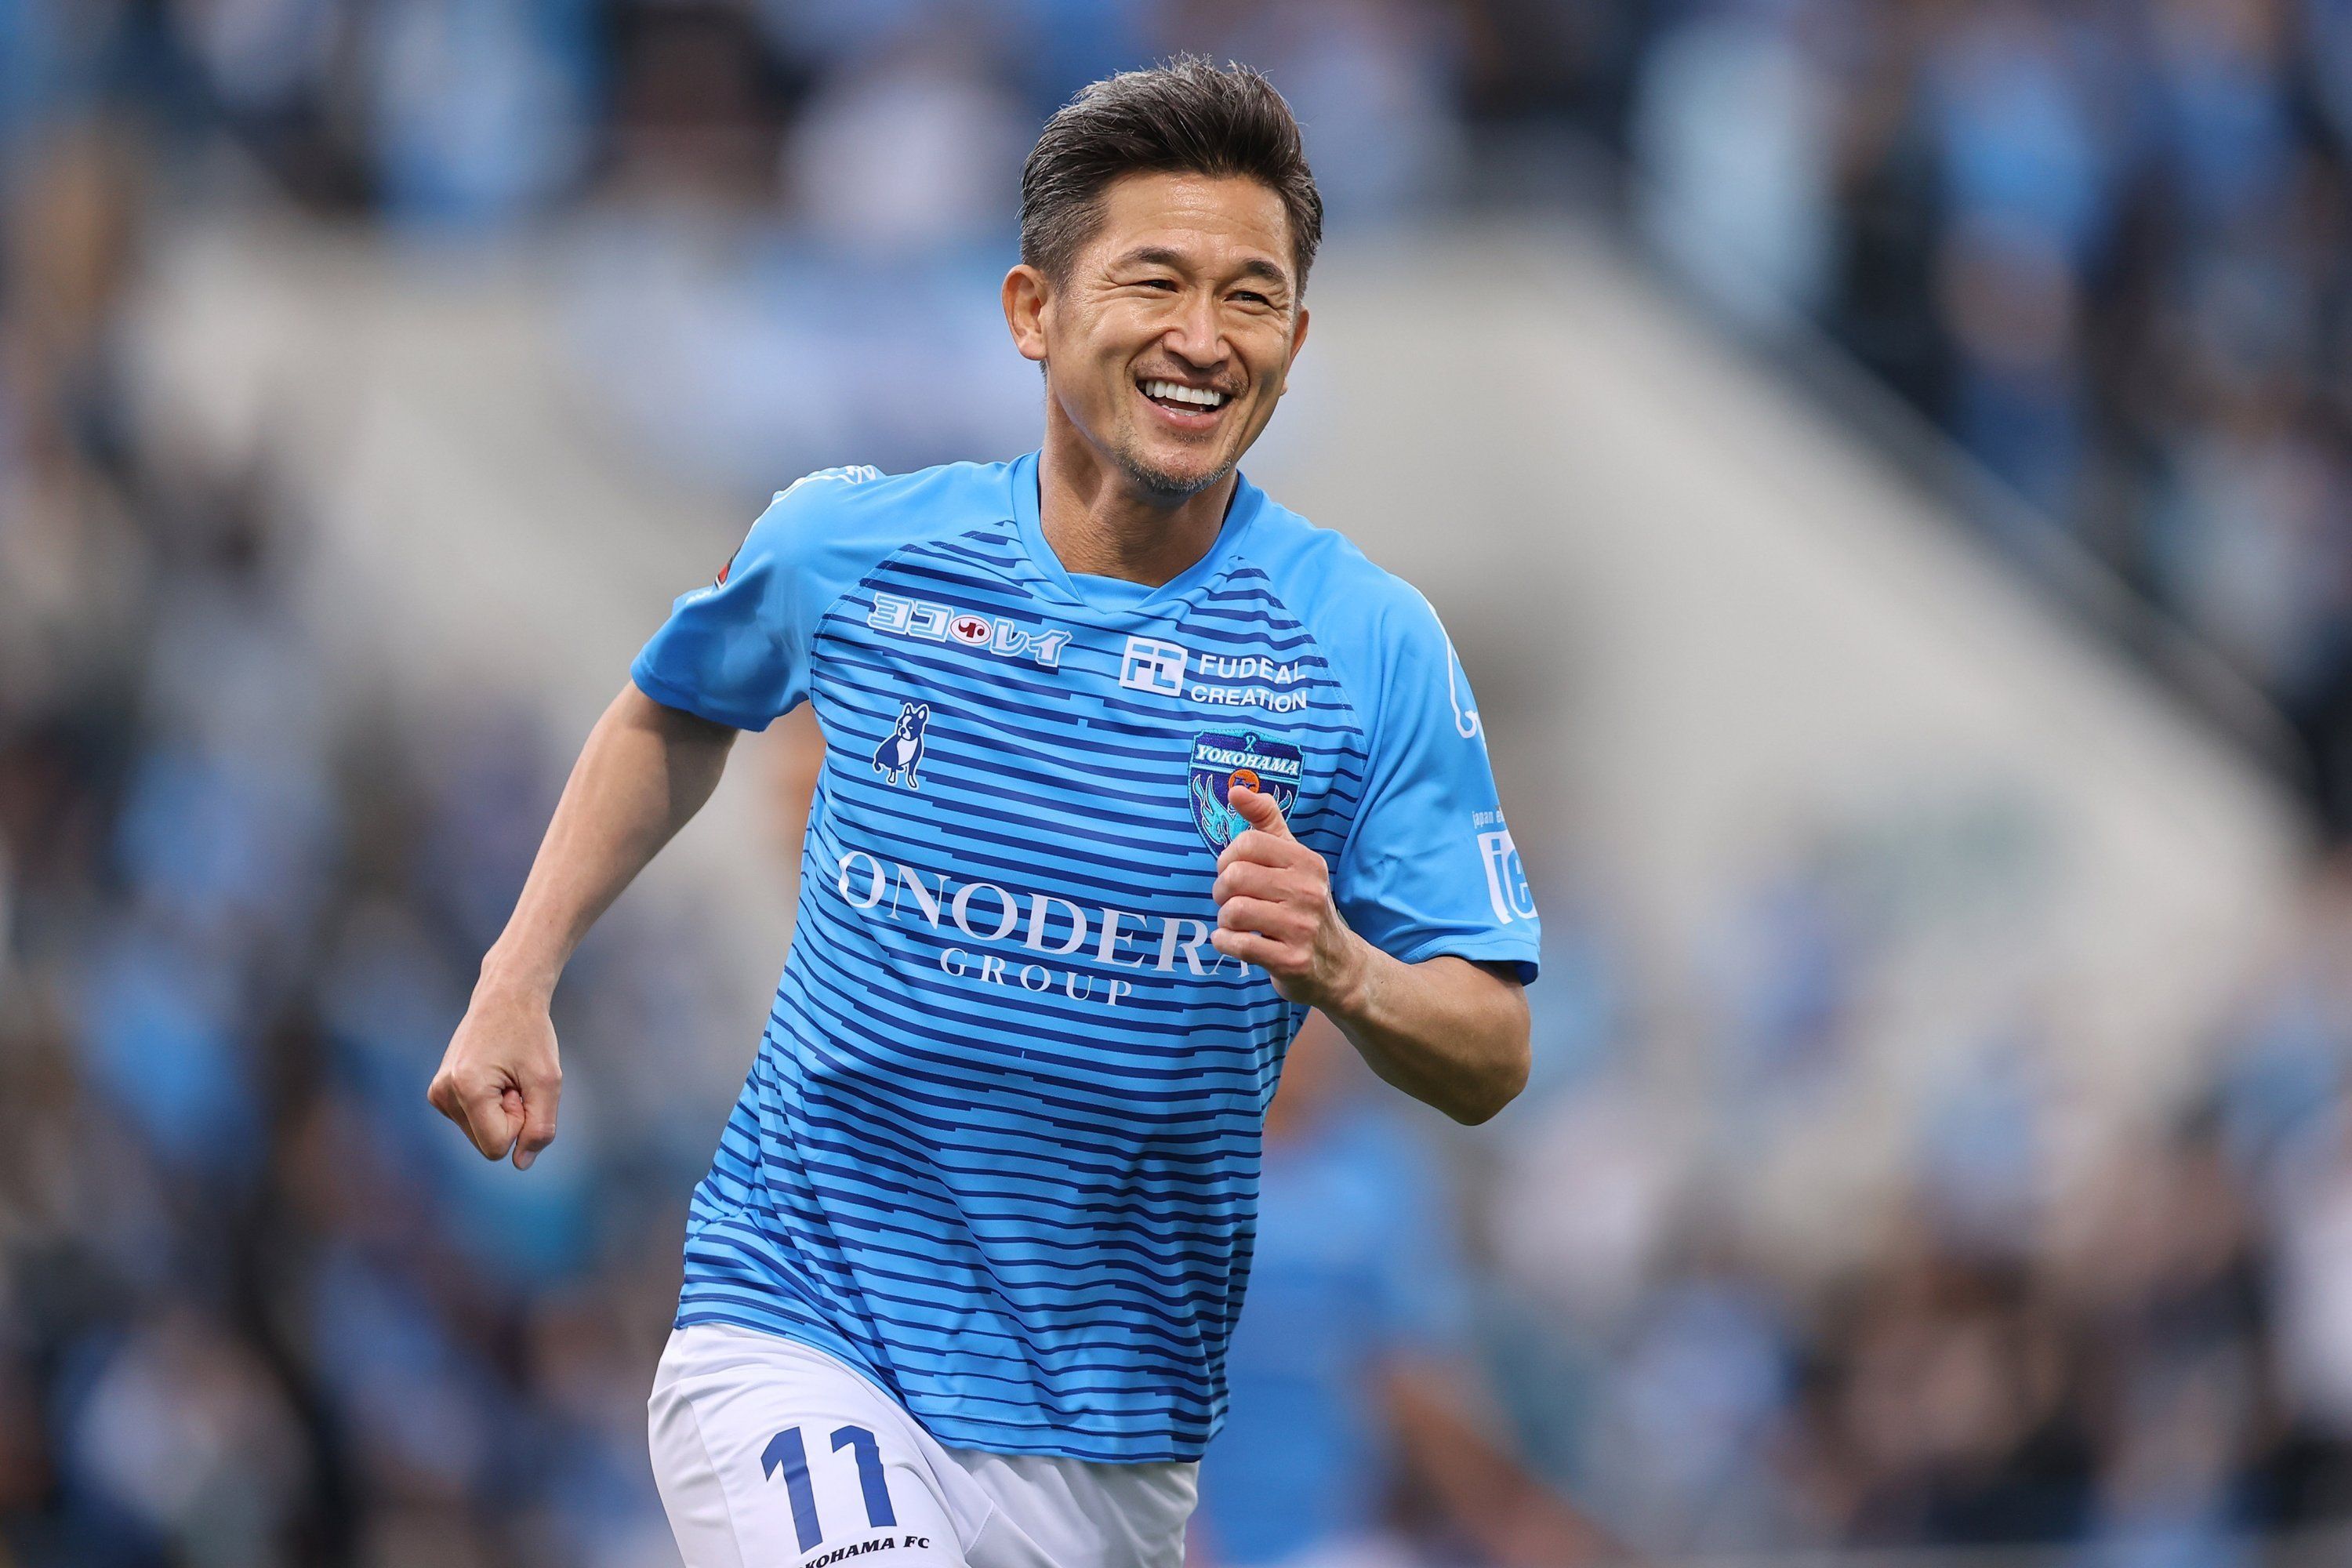 55-year-old Japanese Miura joins Portuguese second division club